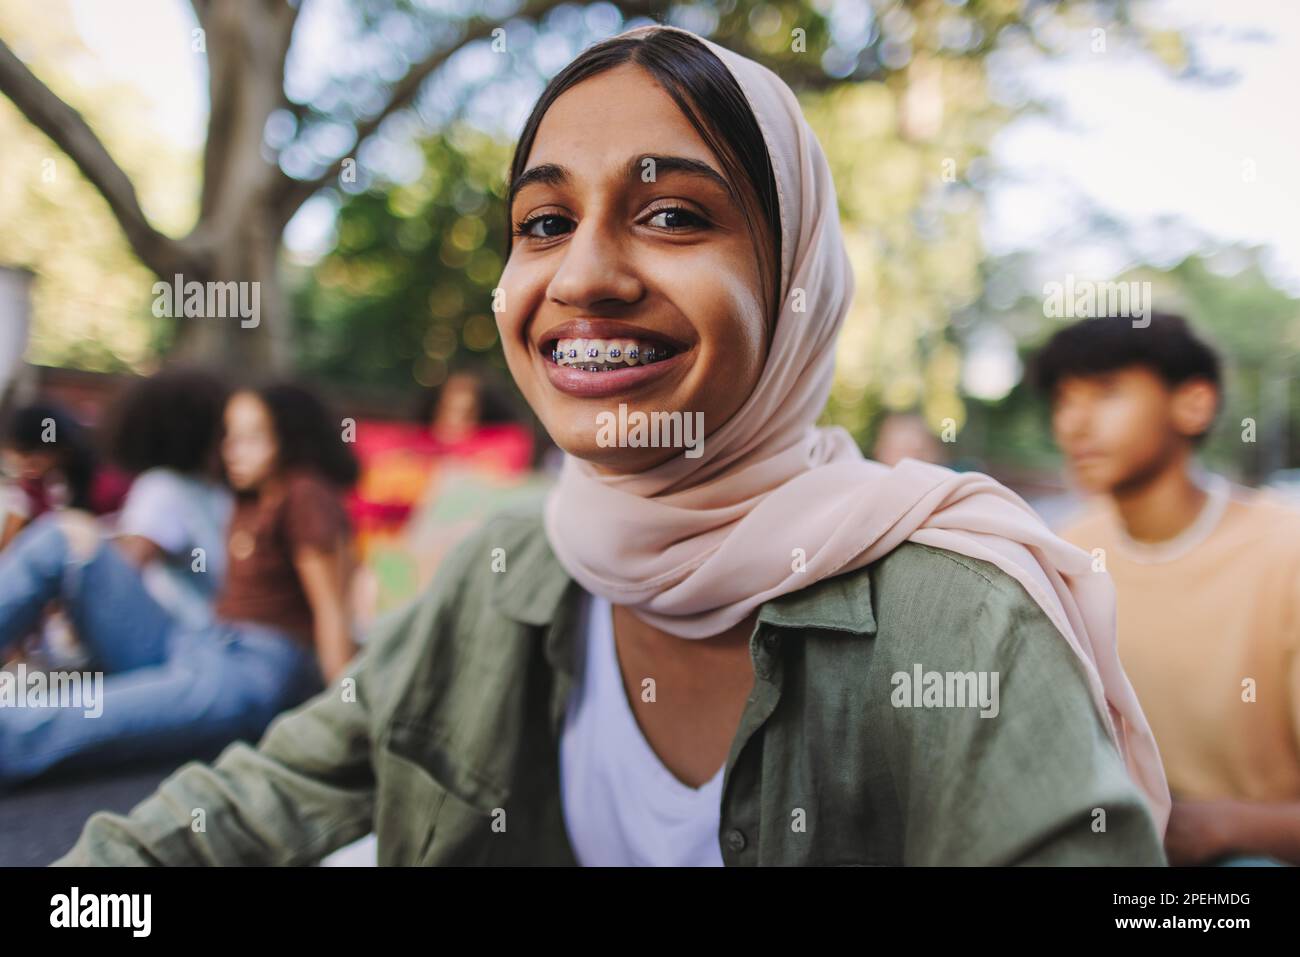 Cheerful Muslim girl smiling at the camera while sitting with a group of demonstrators at a climate protest. Multicultural youth activists joining the Stock Photo